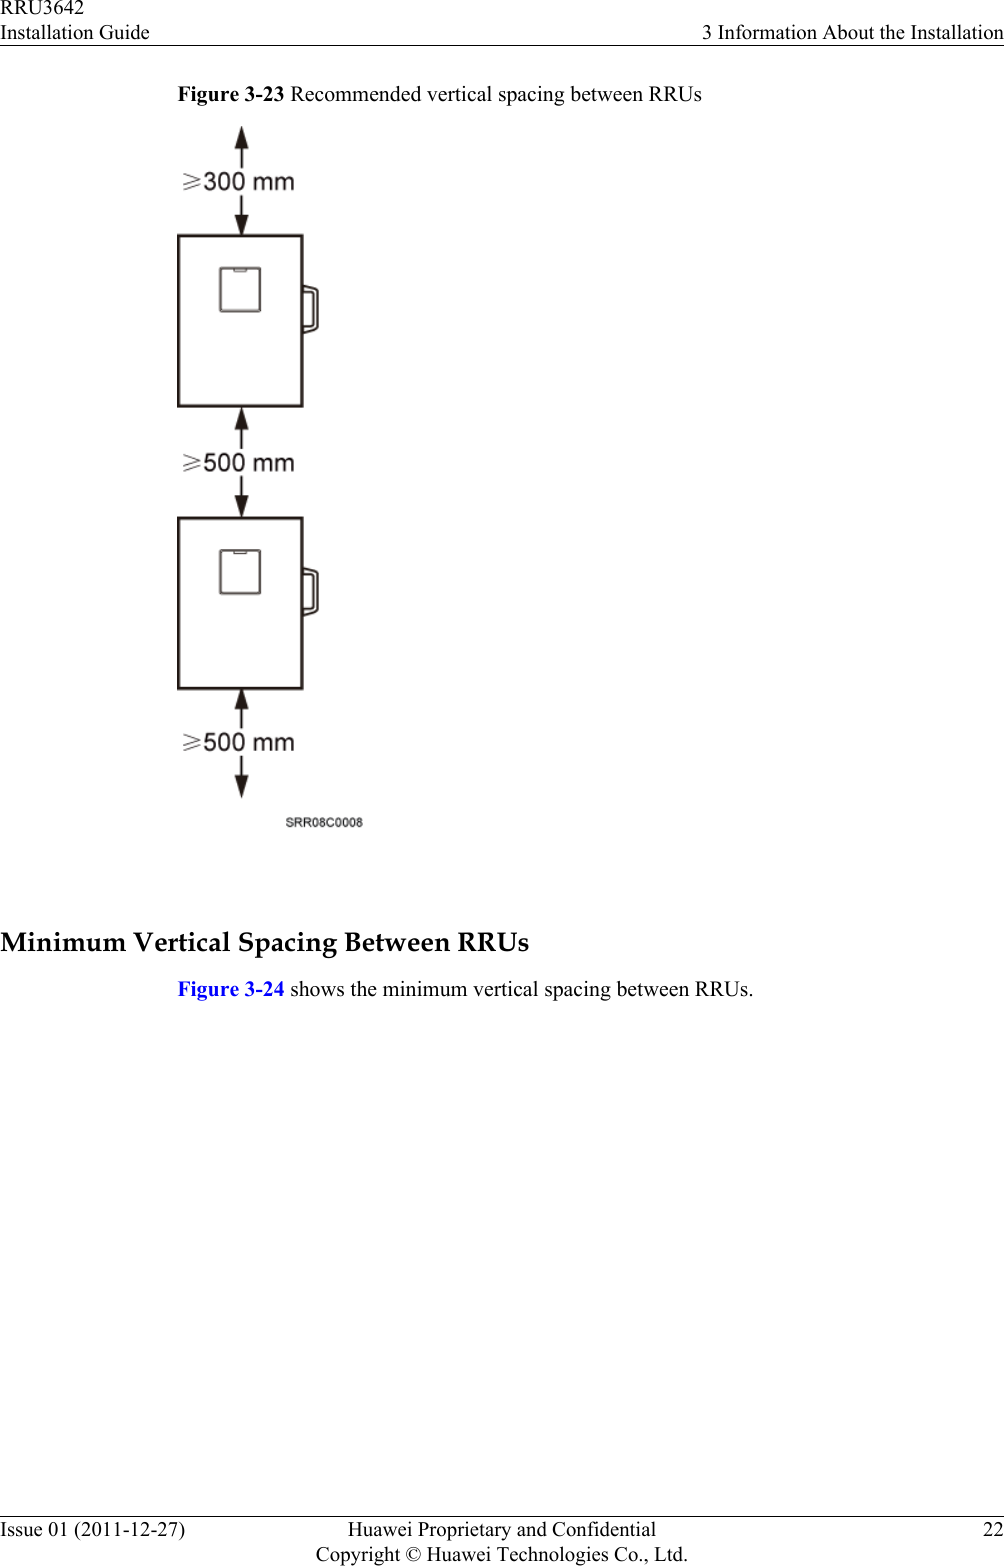 Figure 3-23 Recommended vertical spacing between RRUs Minimum Vertical Spacing Between RRUsFigure 3-24 shows the minimum vertical spacing between RRUs.RRU3642Installation Guide 3 Information About the InstallationIssue 01 (2011-12-27) Huawei Proprietary and ConfidentialCopyright © Huawei Technologies Co., Ltd.22